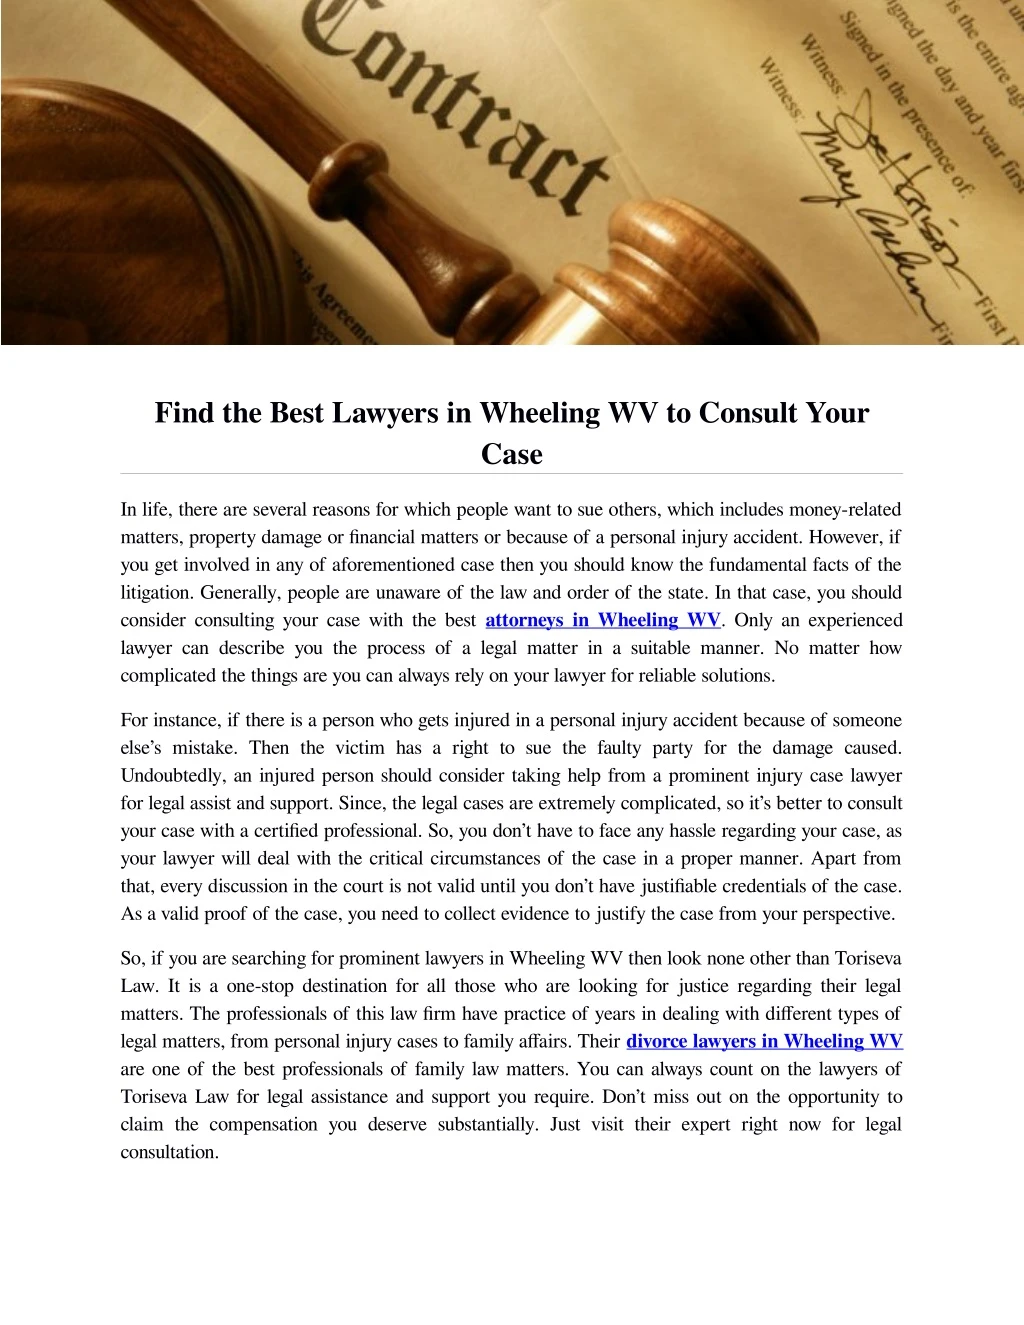 find the best lawyers in wheeling wv to consult